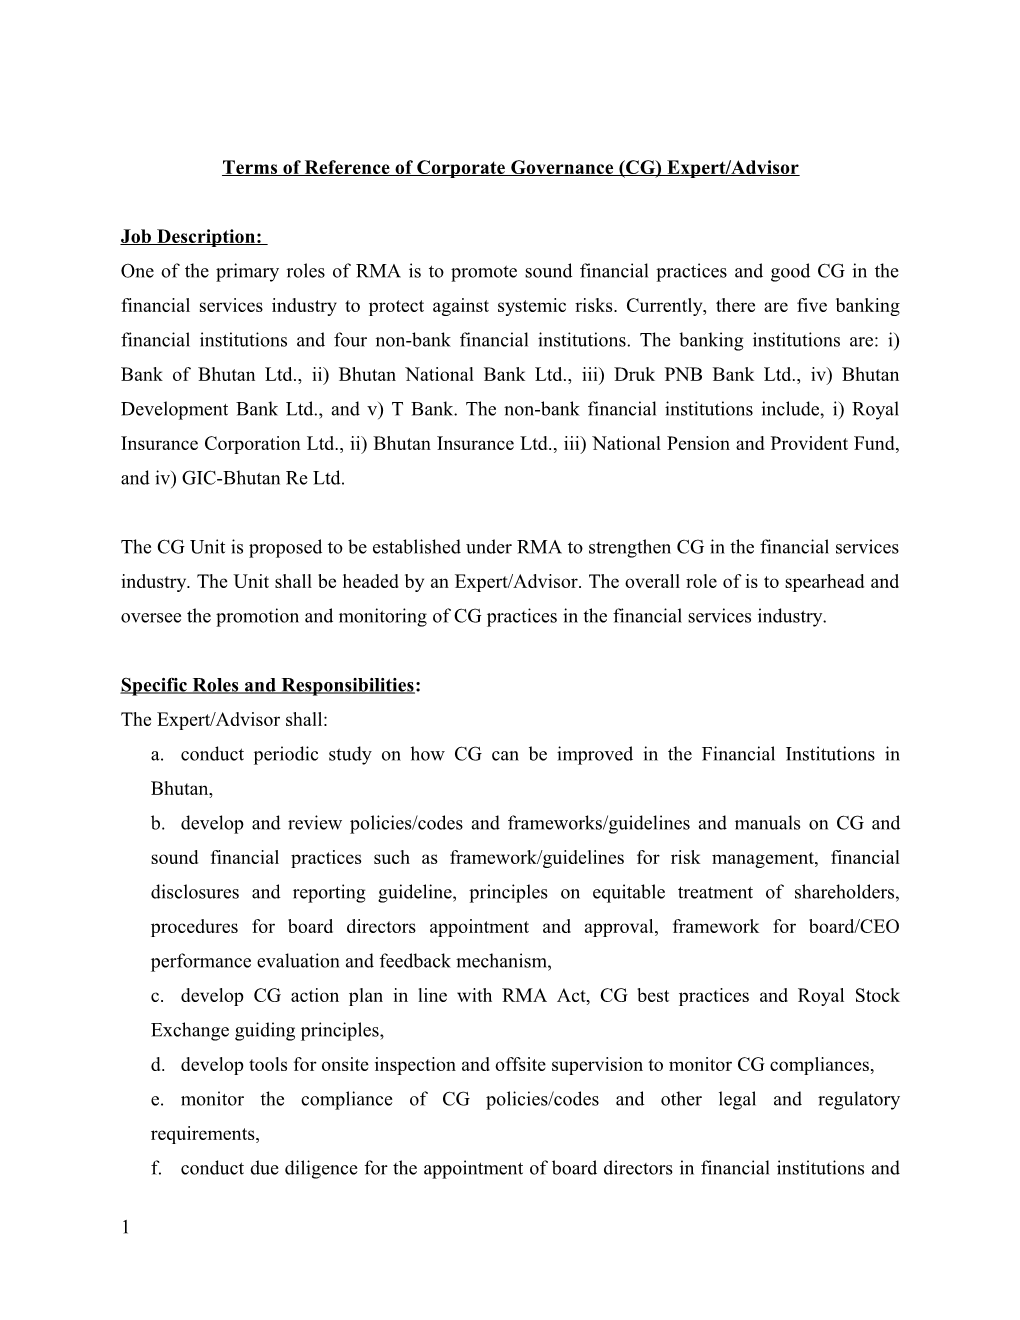 Terms of Reference of Corporate Governance (CG)Expert/Advisor